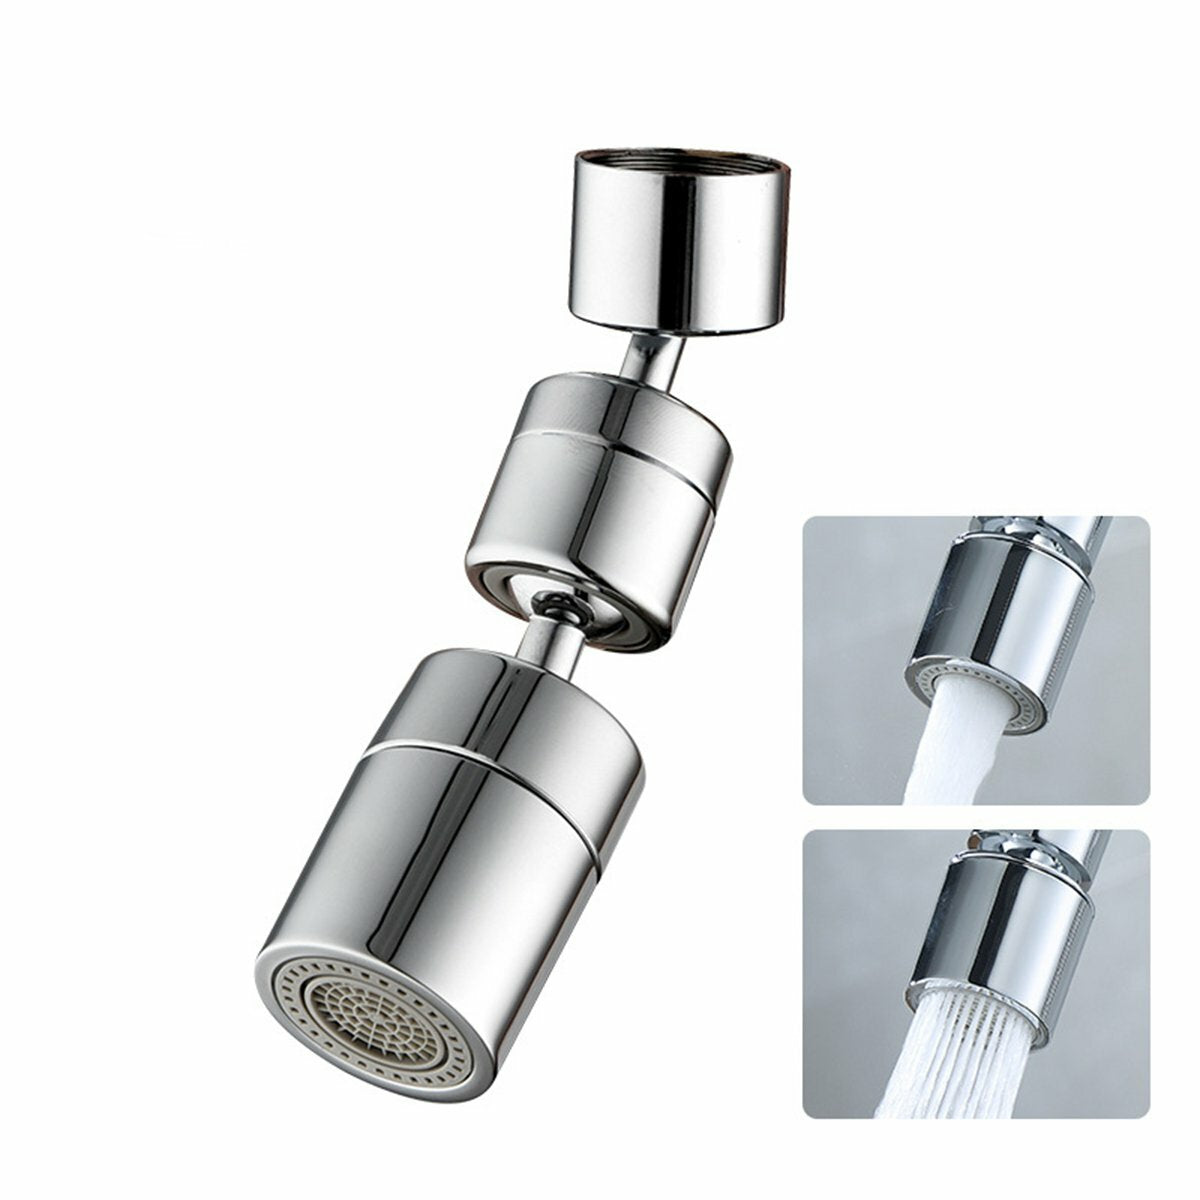 Universal Extender Splash Filter Faucet 1080 Rotate Water Outlet Faucet Silver